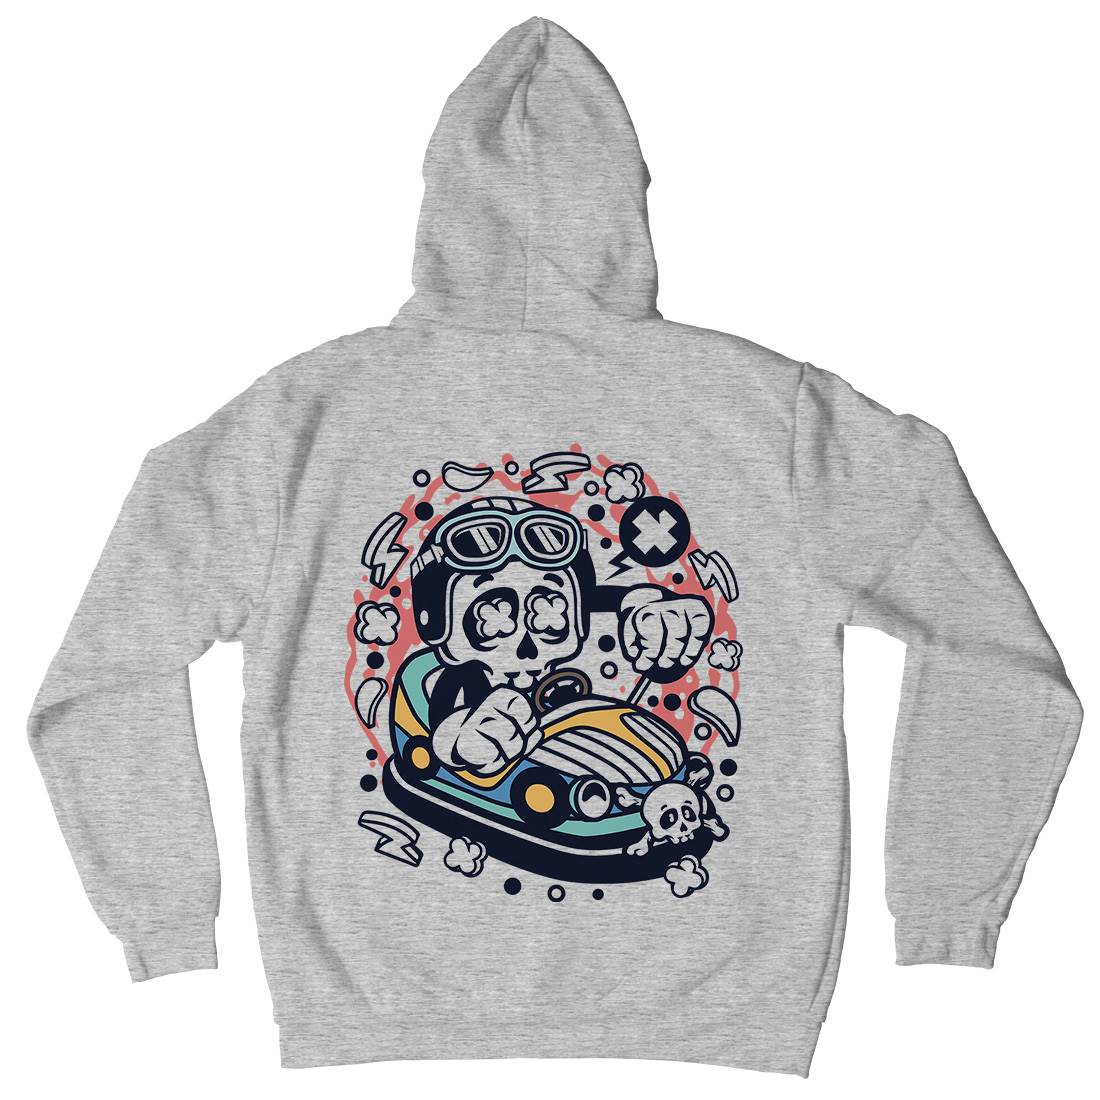 Car Toy Skull Mens Hoodie With Pocket Cars C046